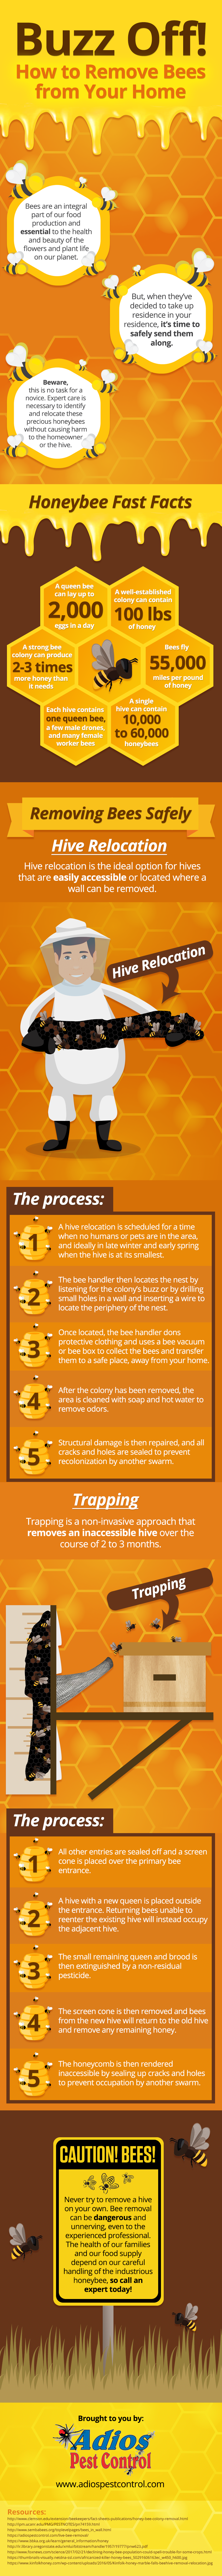 infographic sharing how to remove bees from your home